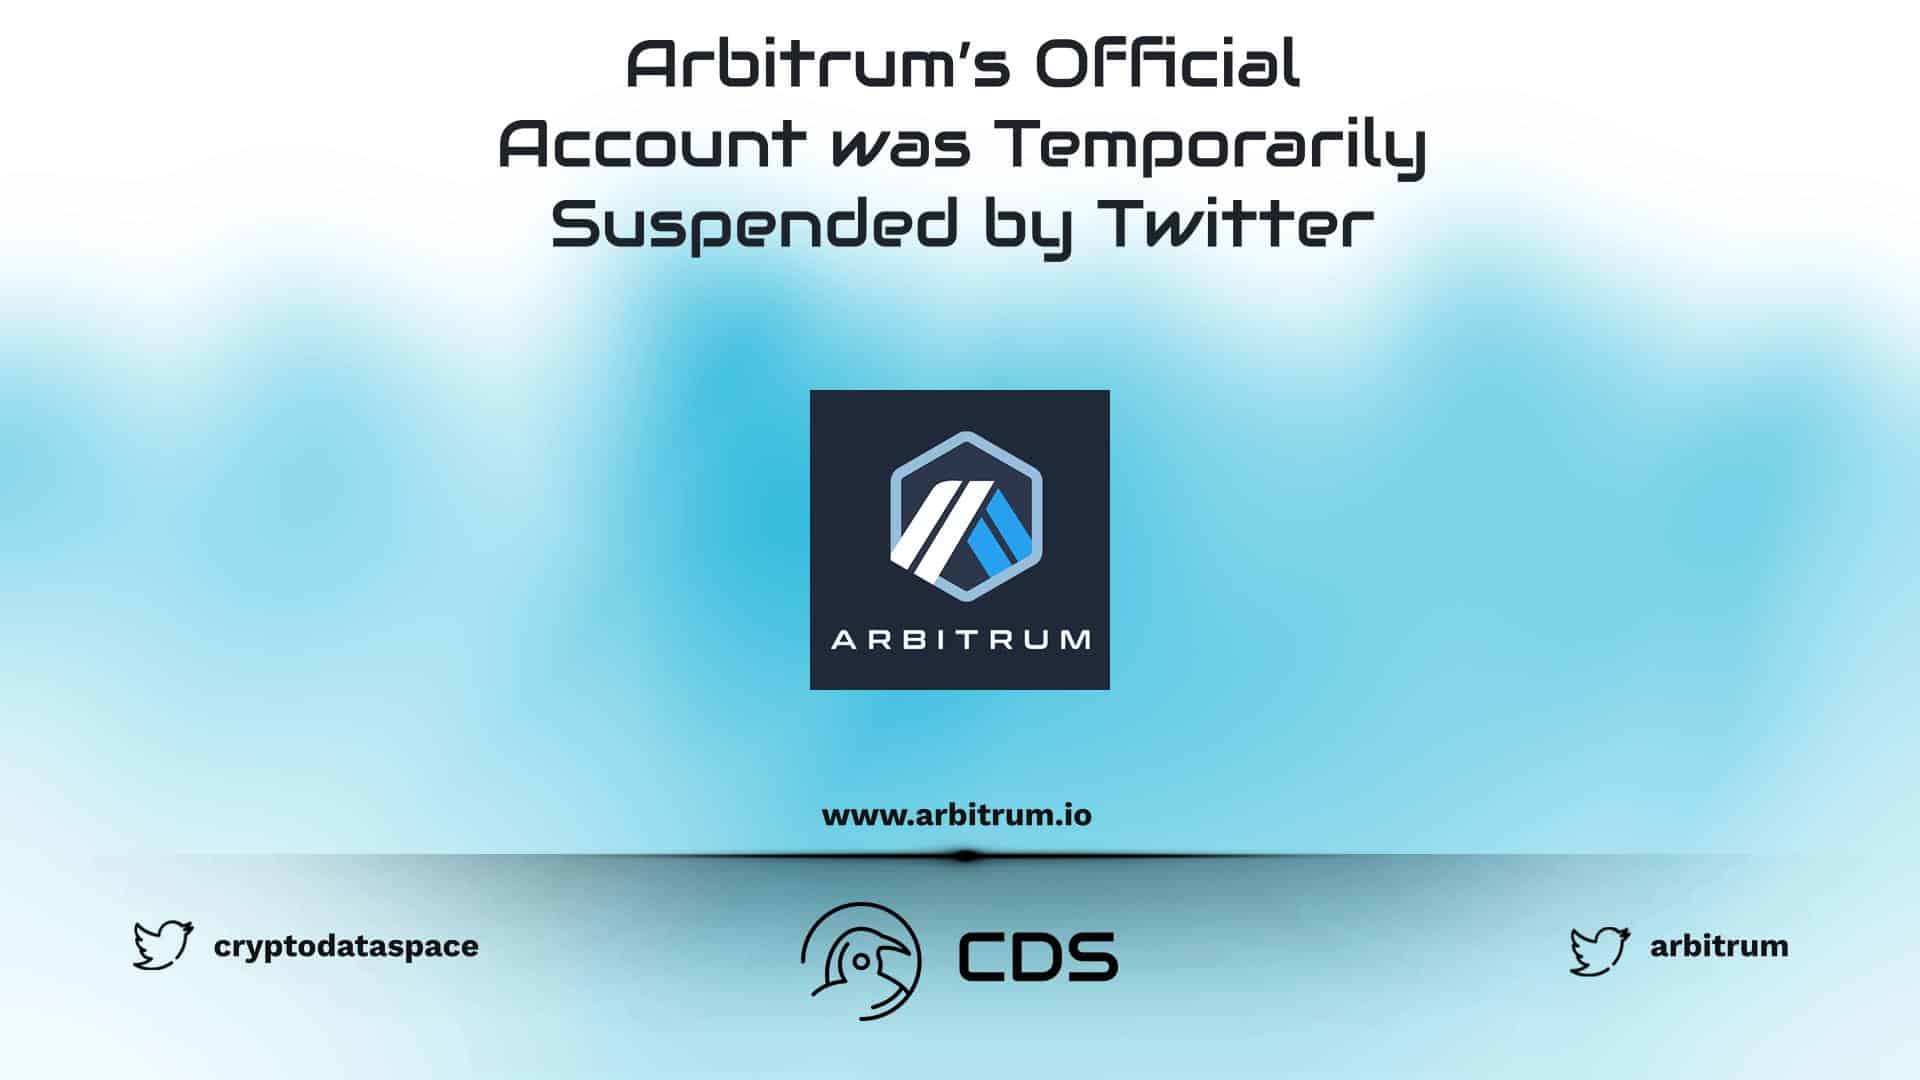 Arbitrum’s Official Account was Temporarily Suspended by Twitter